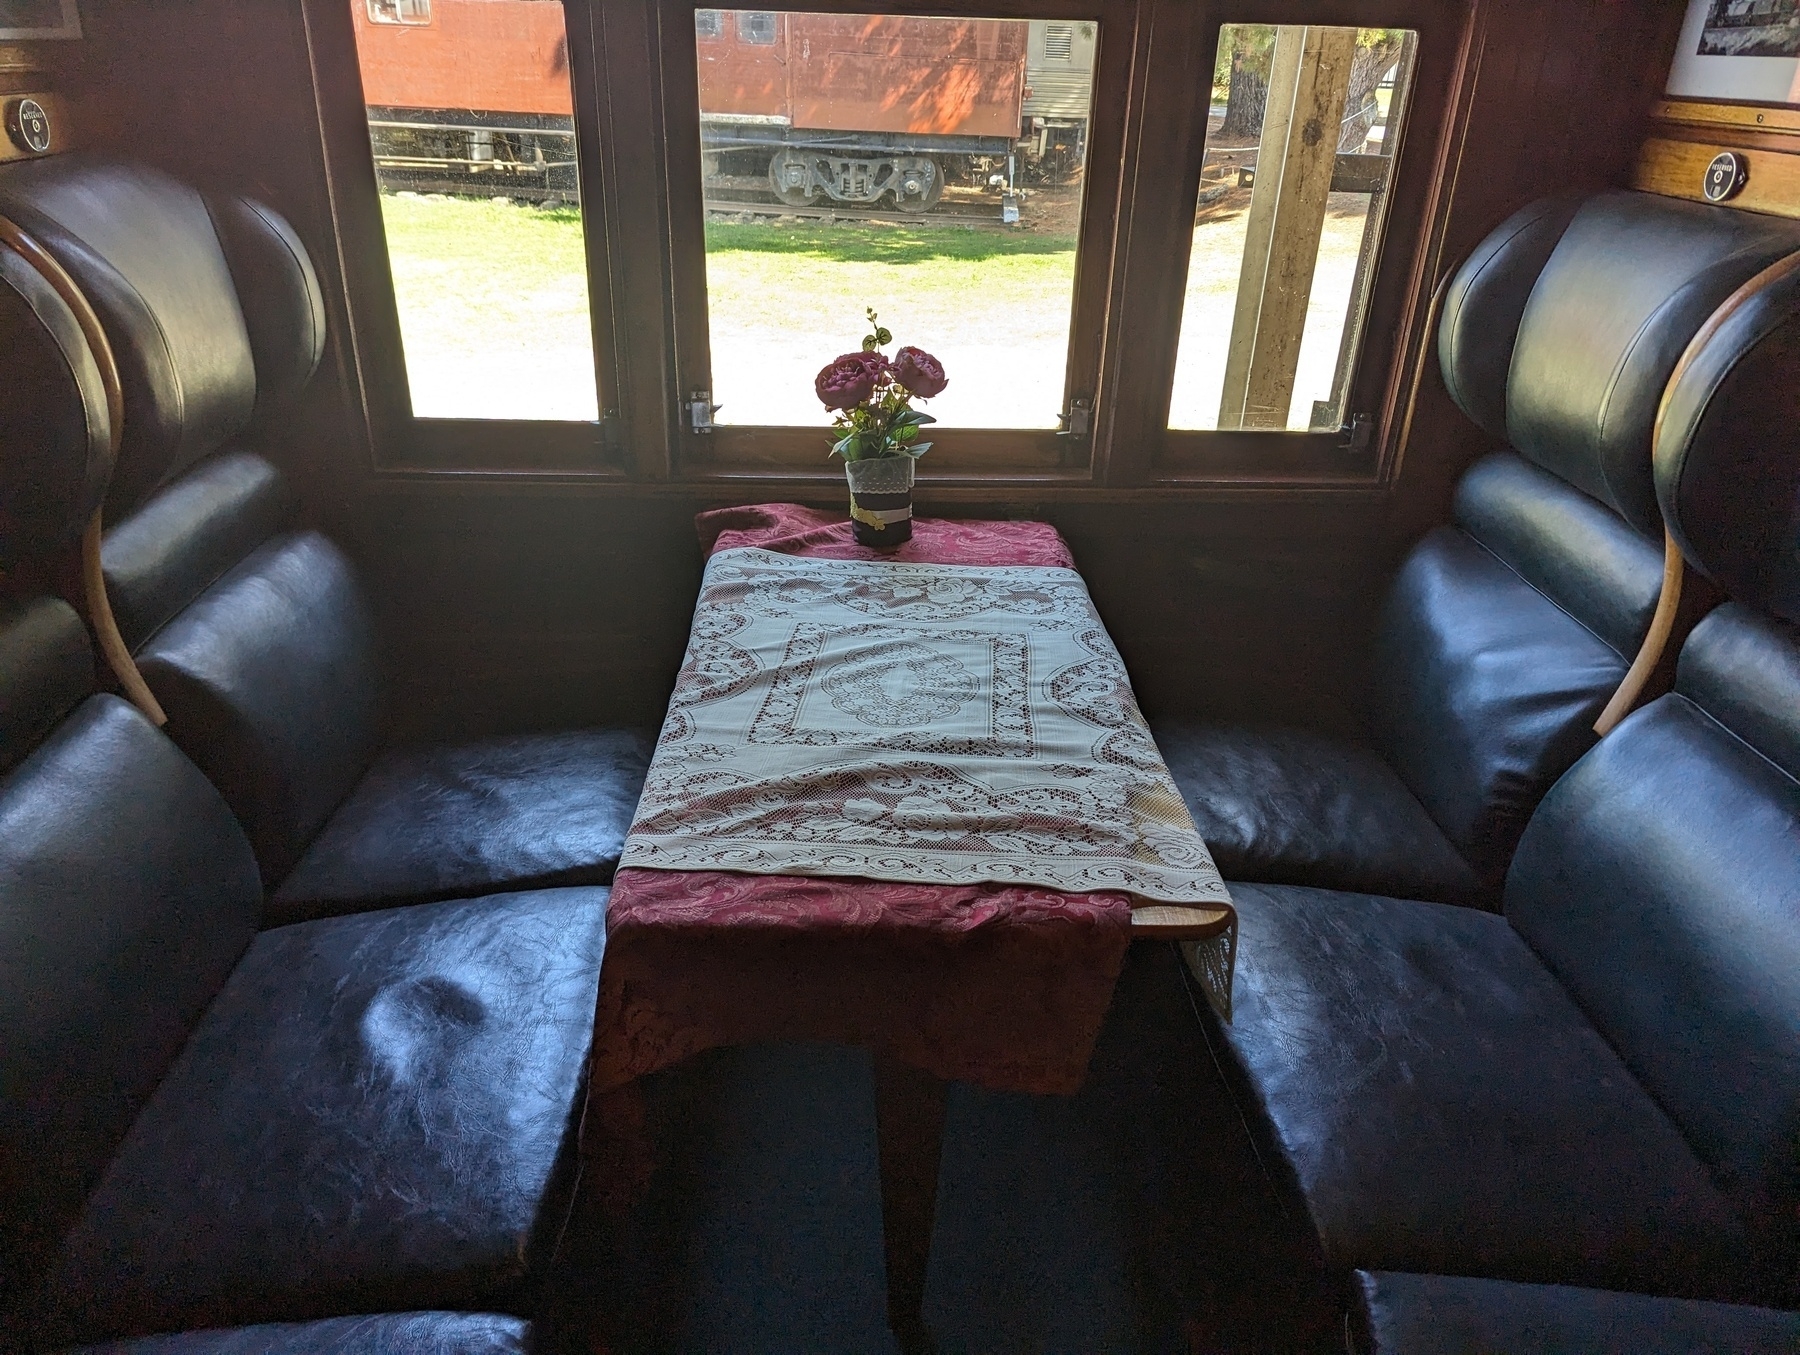 Flowers in a vase on a table in an old fashioned dining car.